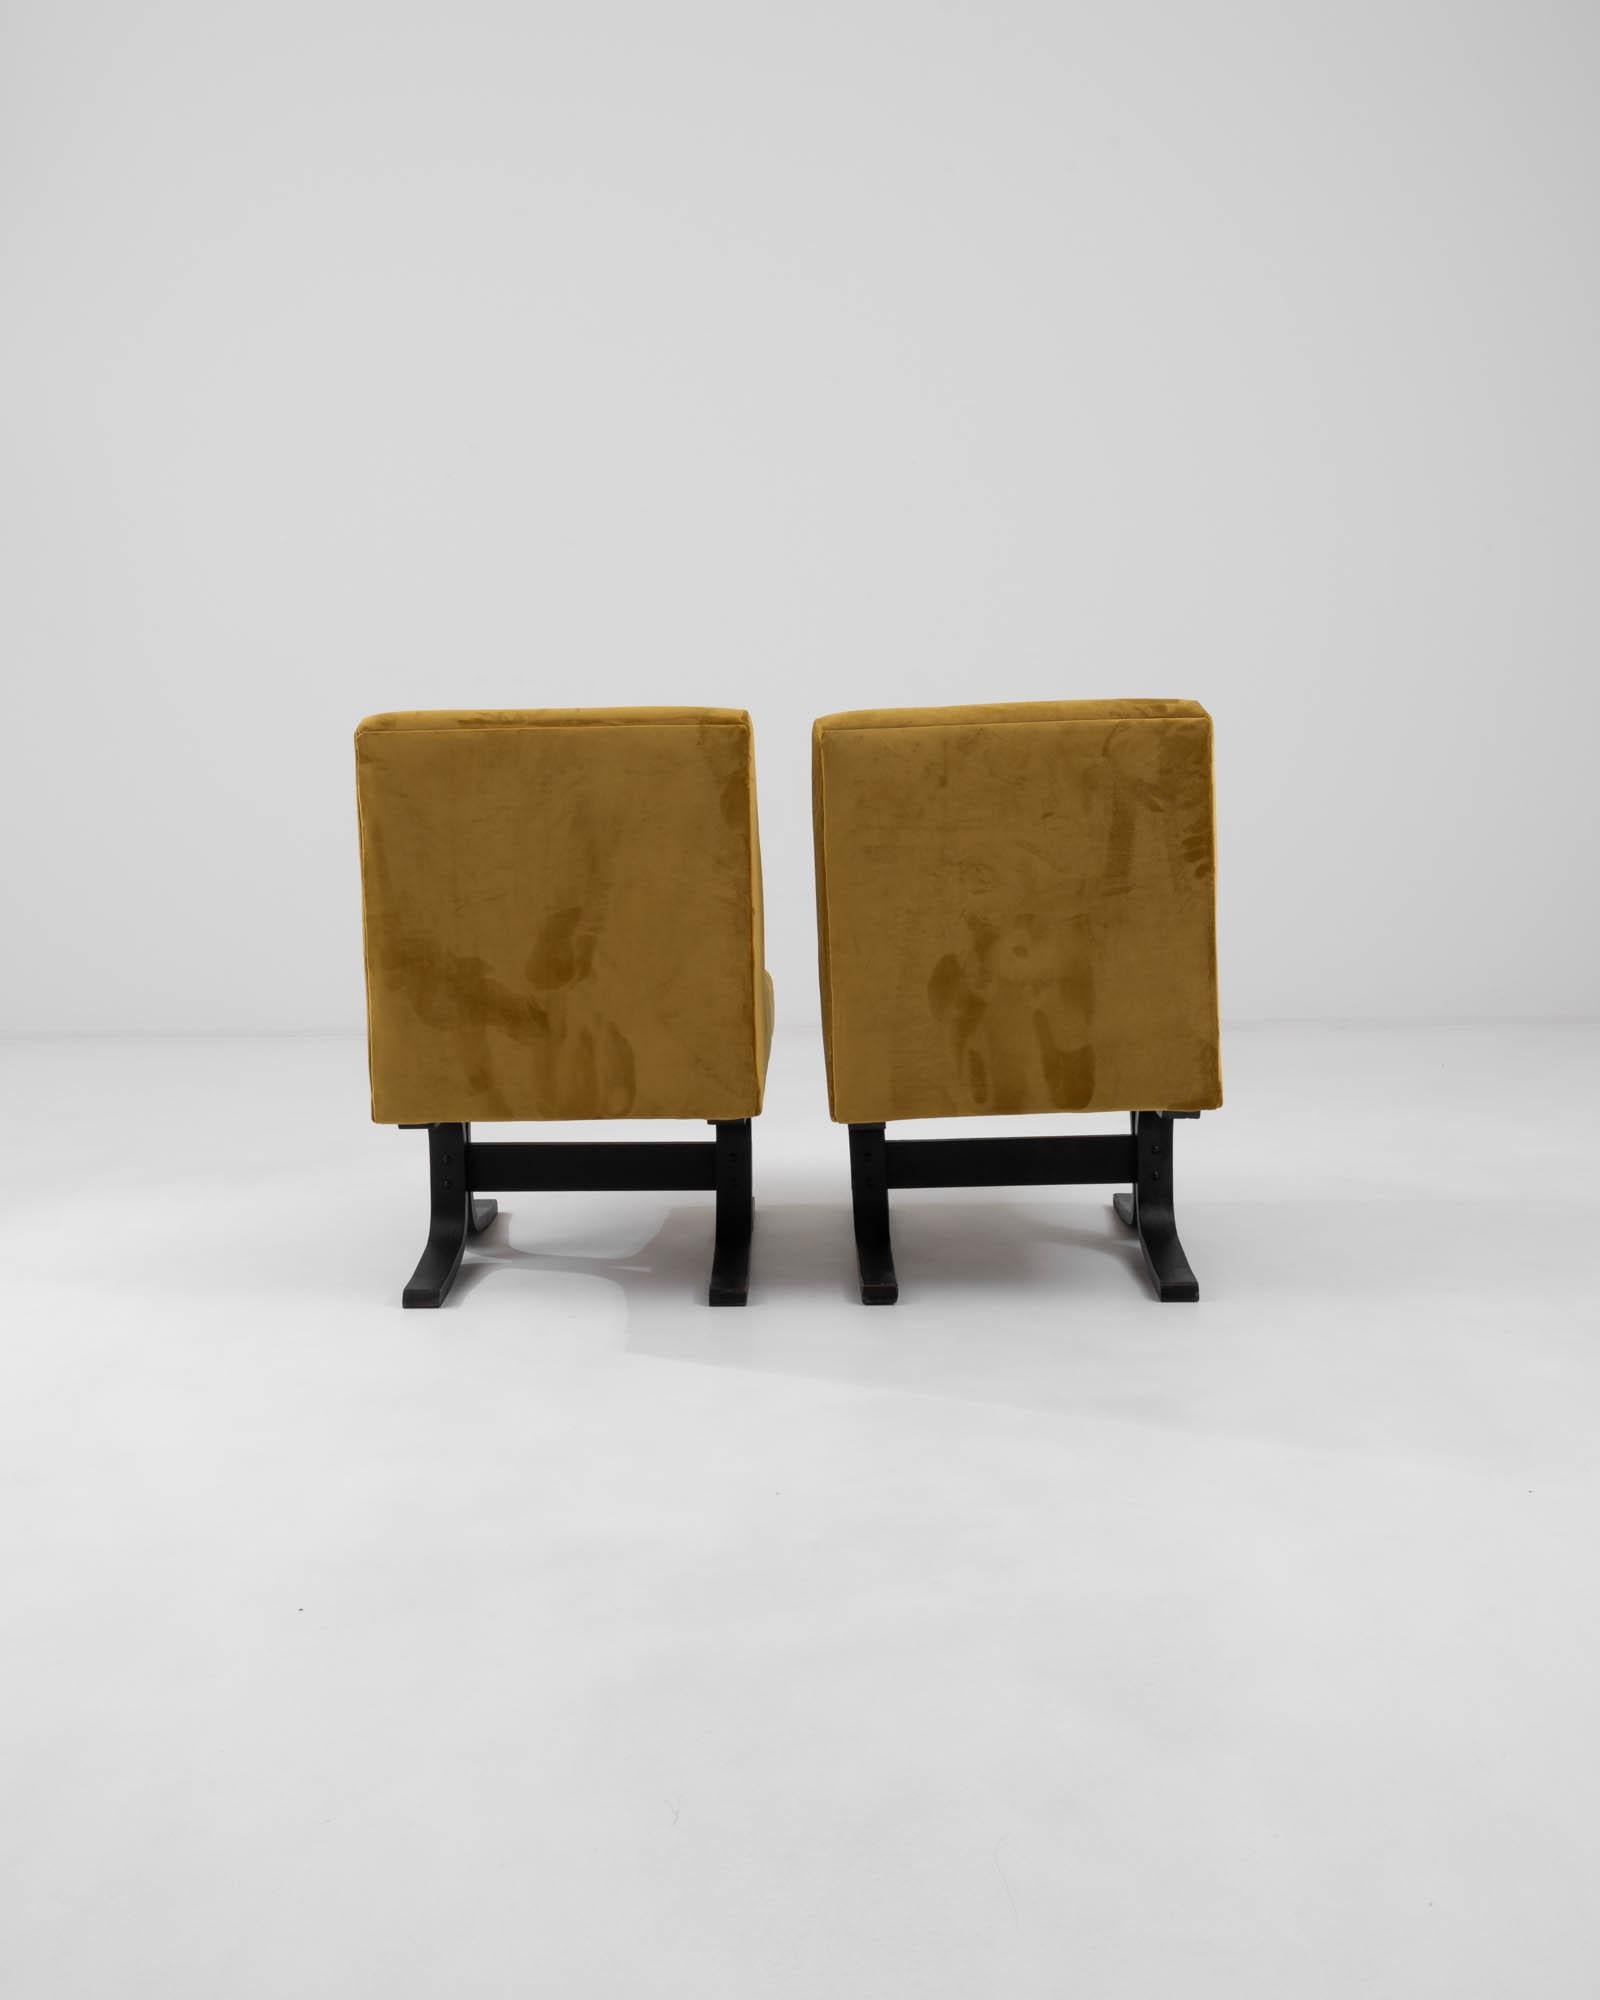 1960 Czechia Upholstered Chairs by Ludvik Volak, Set of 2 For Sale 1